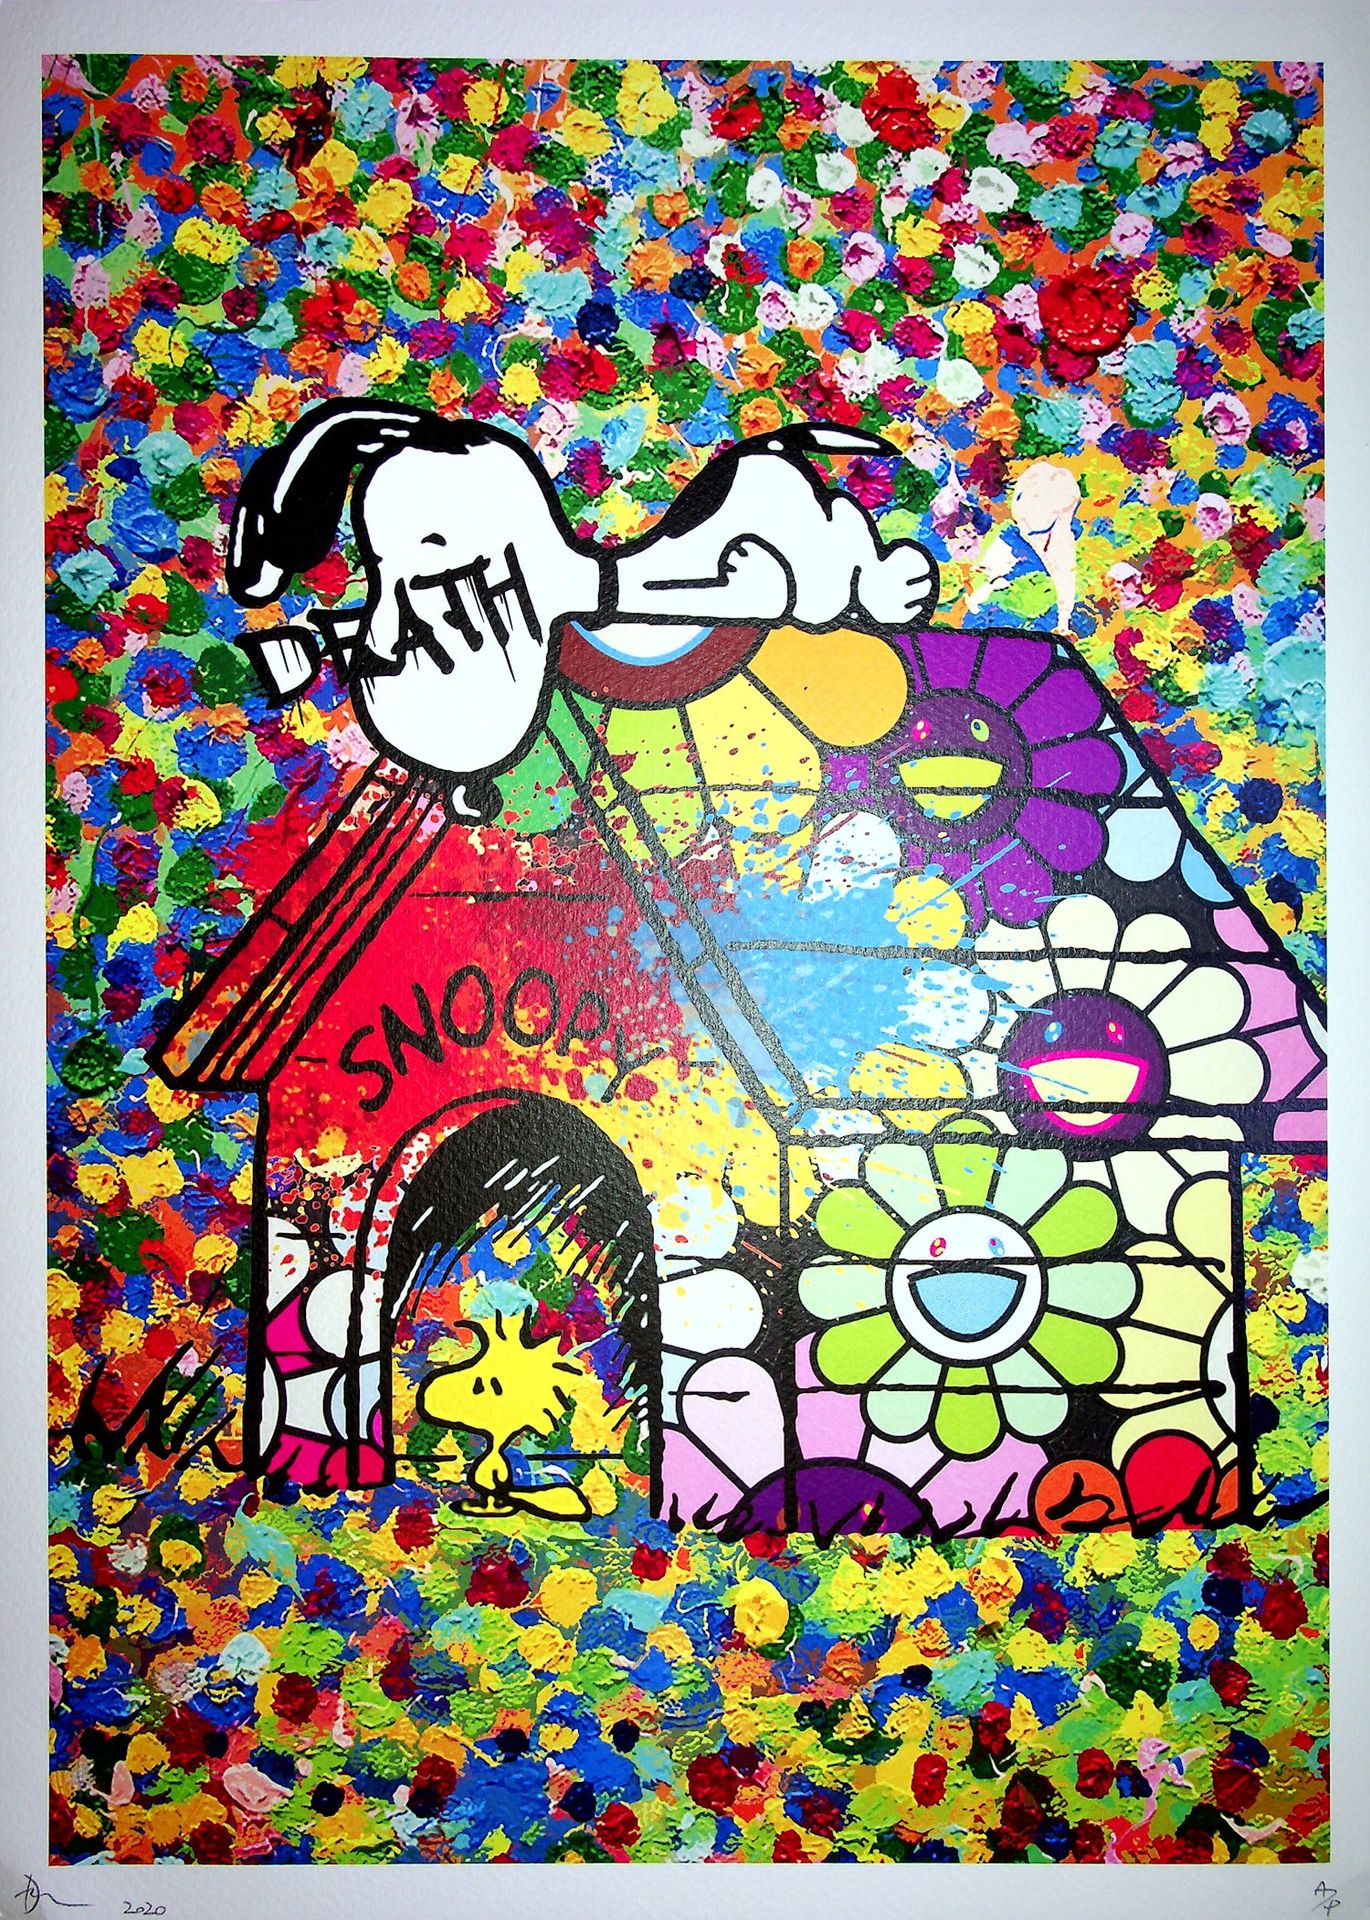 Death NYC Death NYC

Snoopy's kennel by Murakami, 2020

Sérigraphie originale

S&hellip;